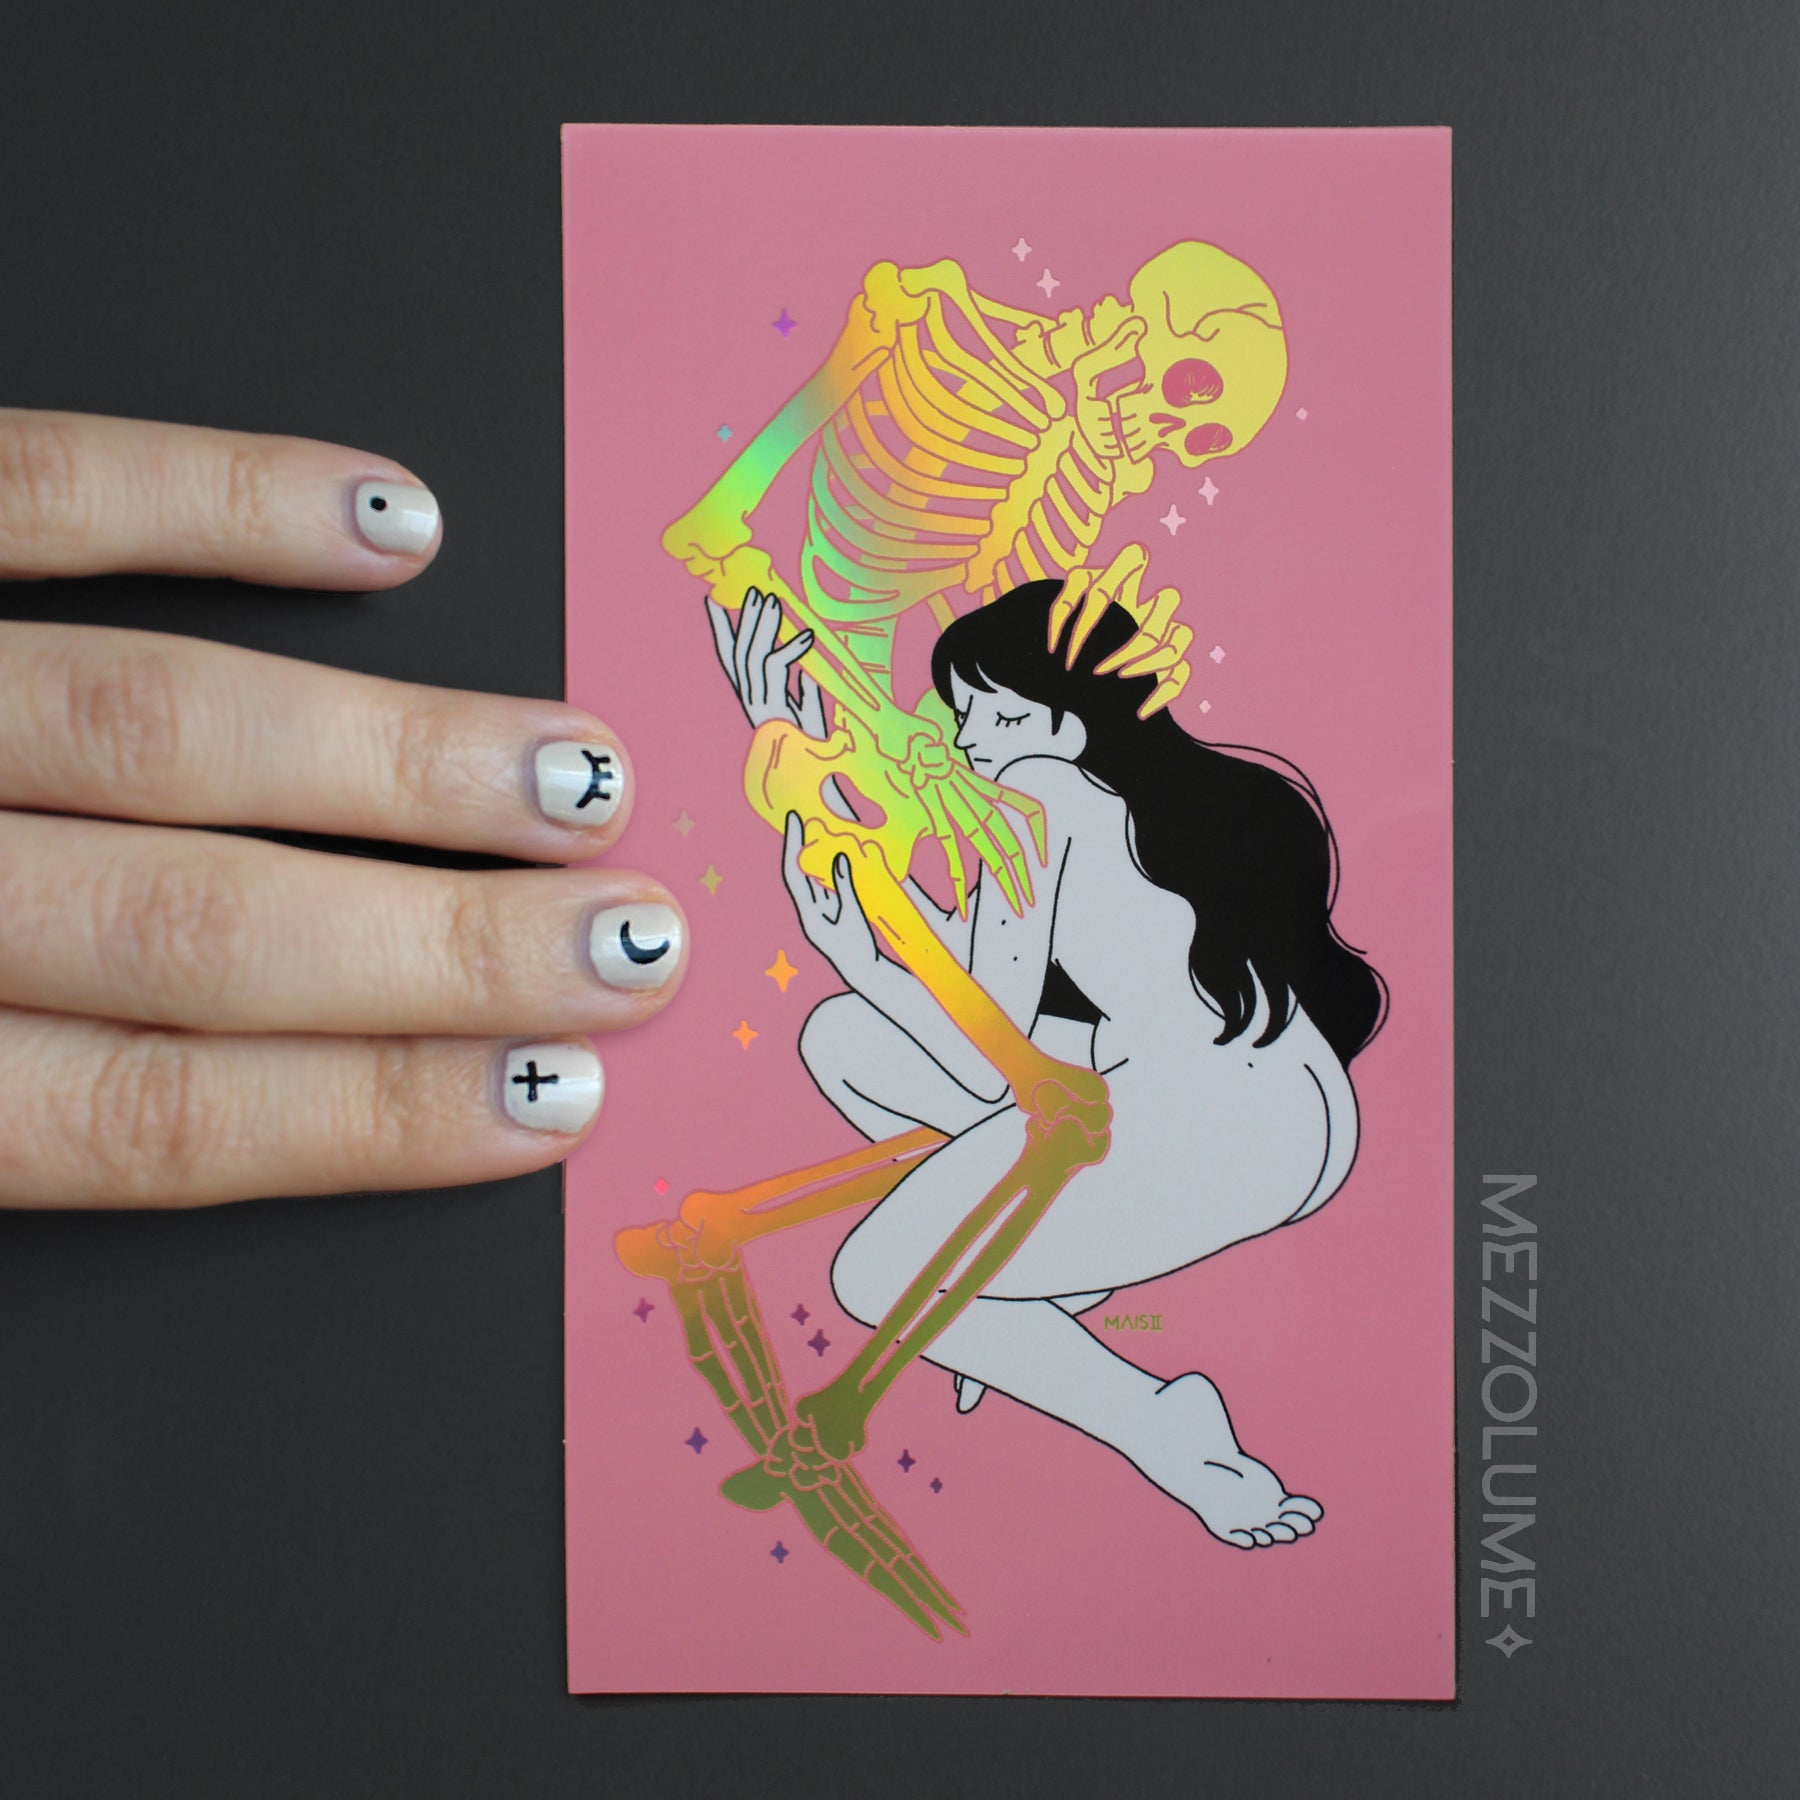 Part of the deal - Premium holo Sticky art - Alessandra Criseo